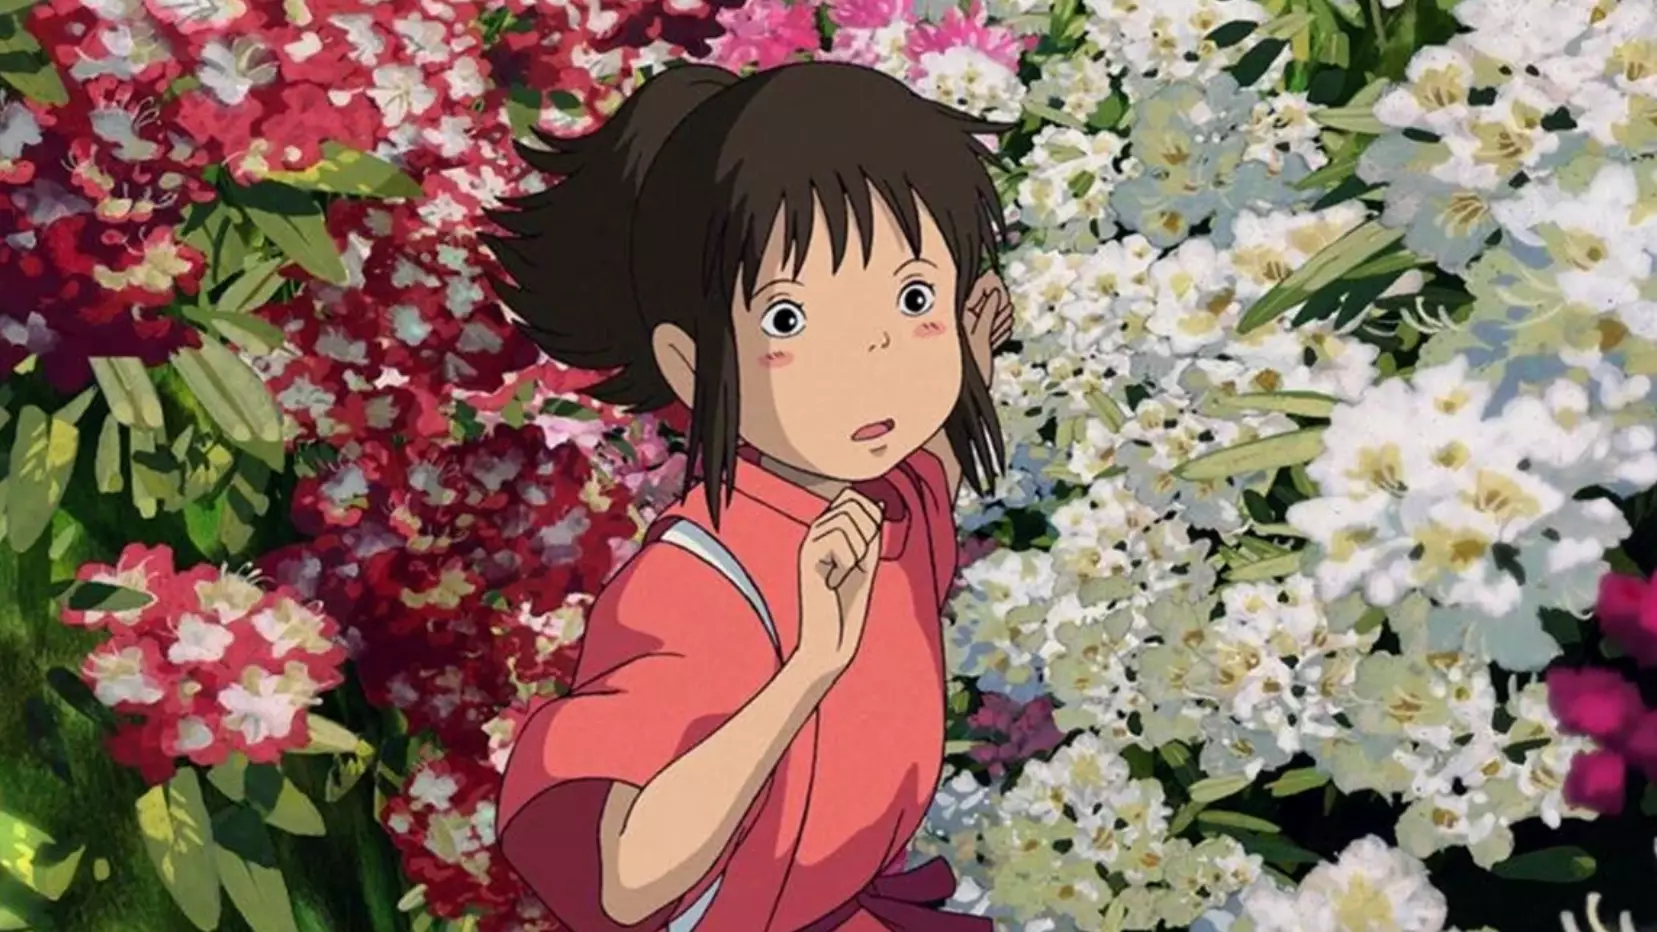 Soundtracks From Every Studio Ghibli Film Added To Music Streaming Services